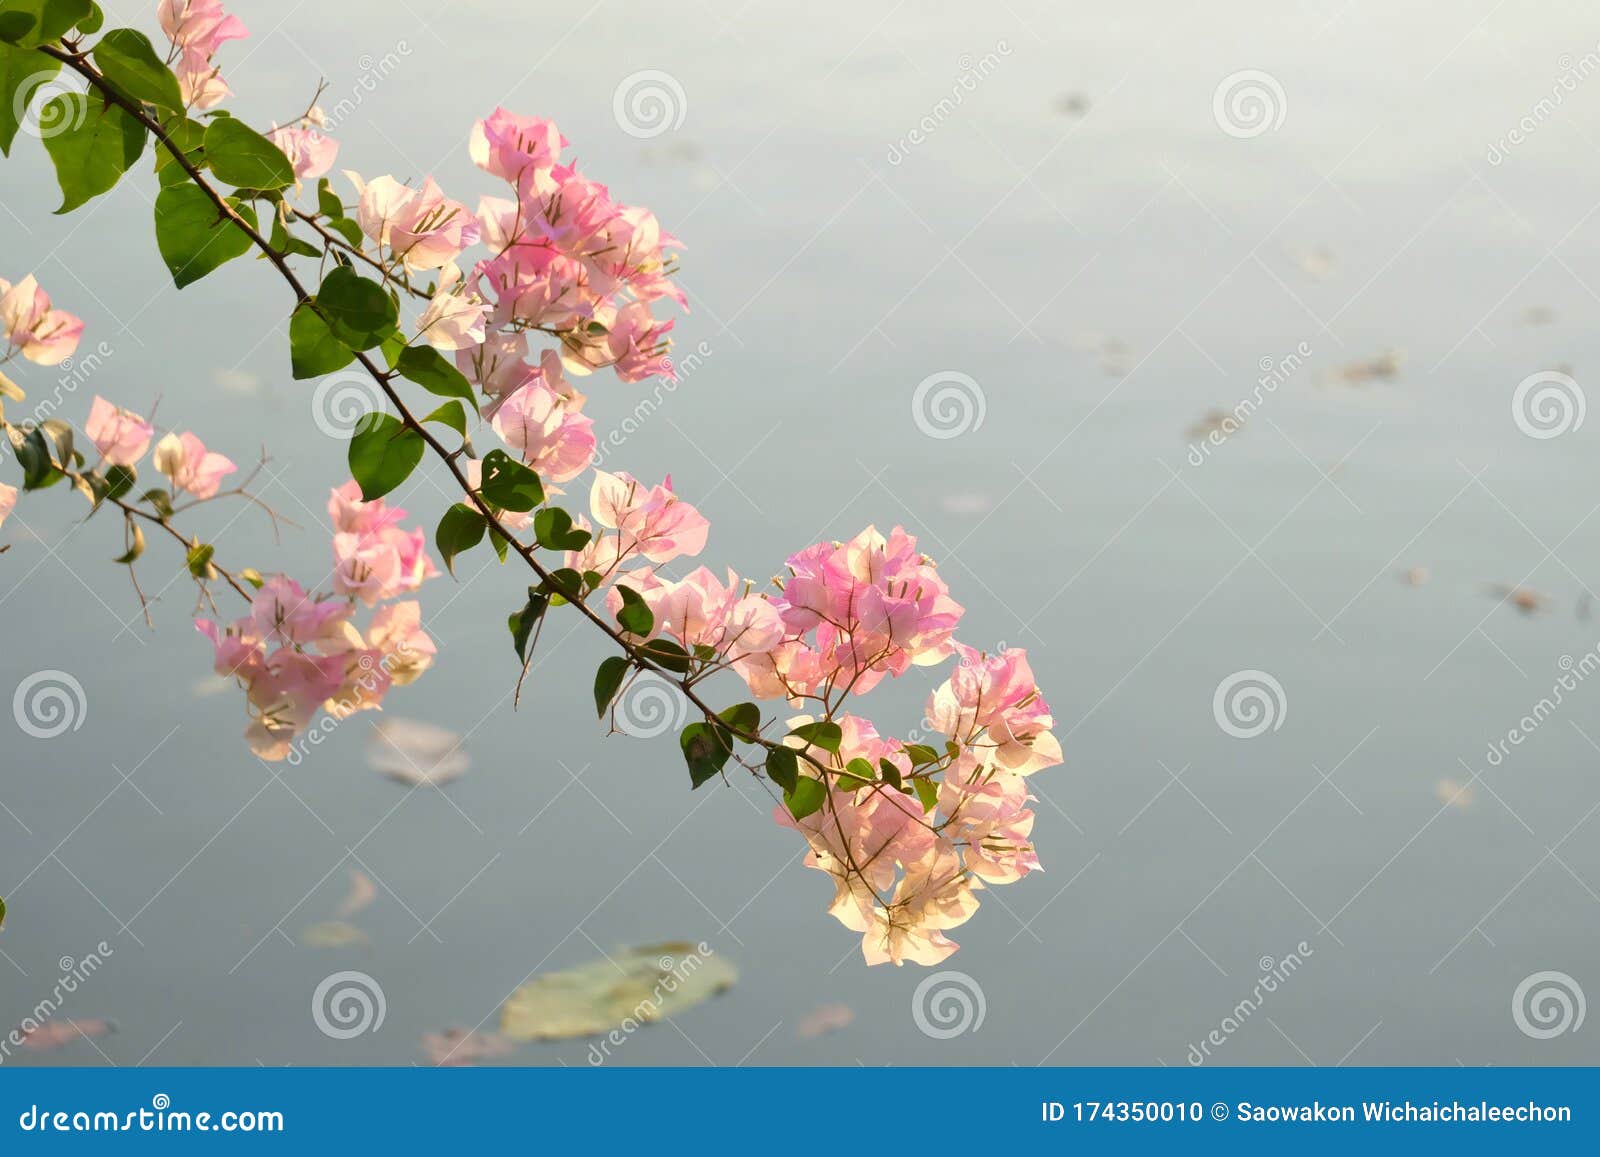 A Bouquet of Sweet Pink Bougainvillea Flower Blossom Stock Photo ...